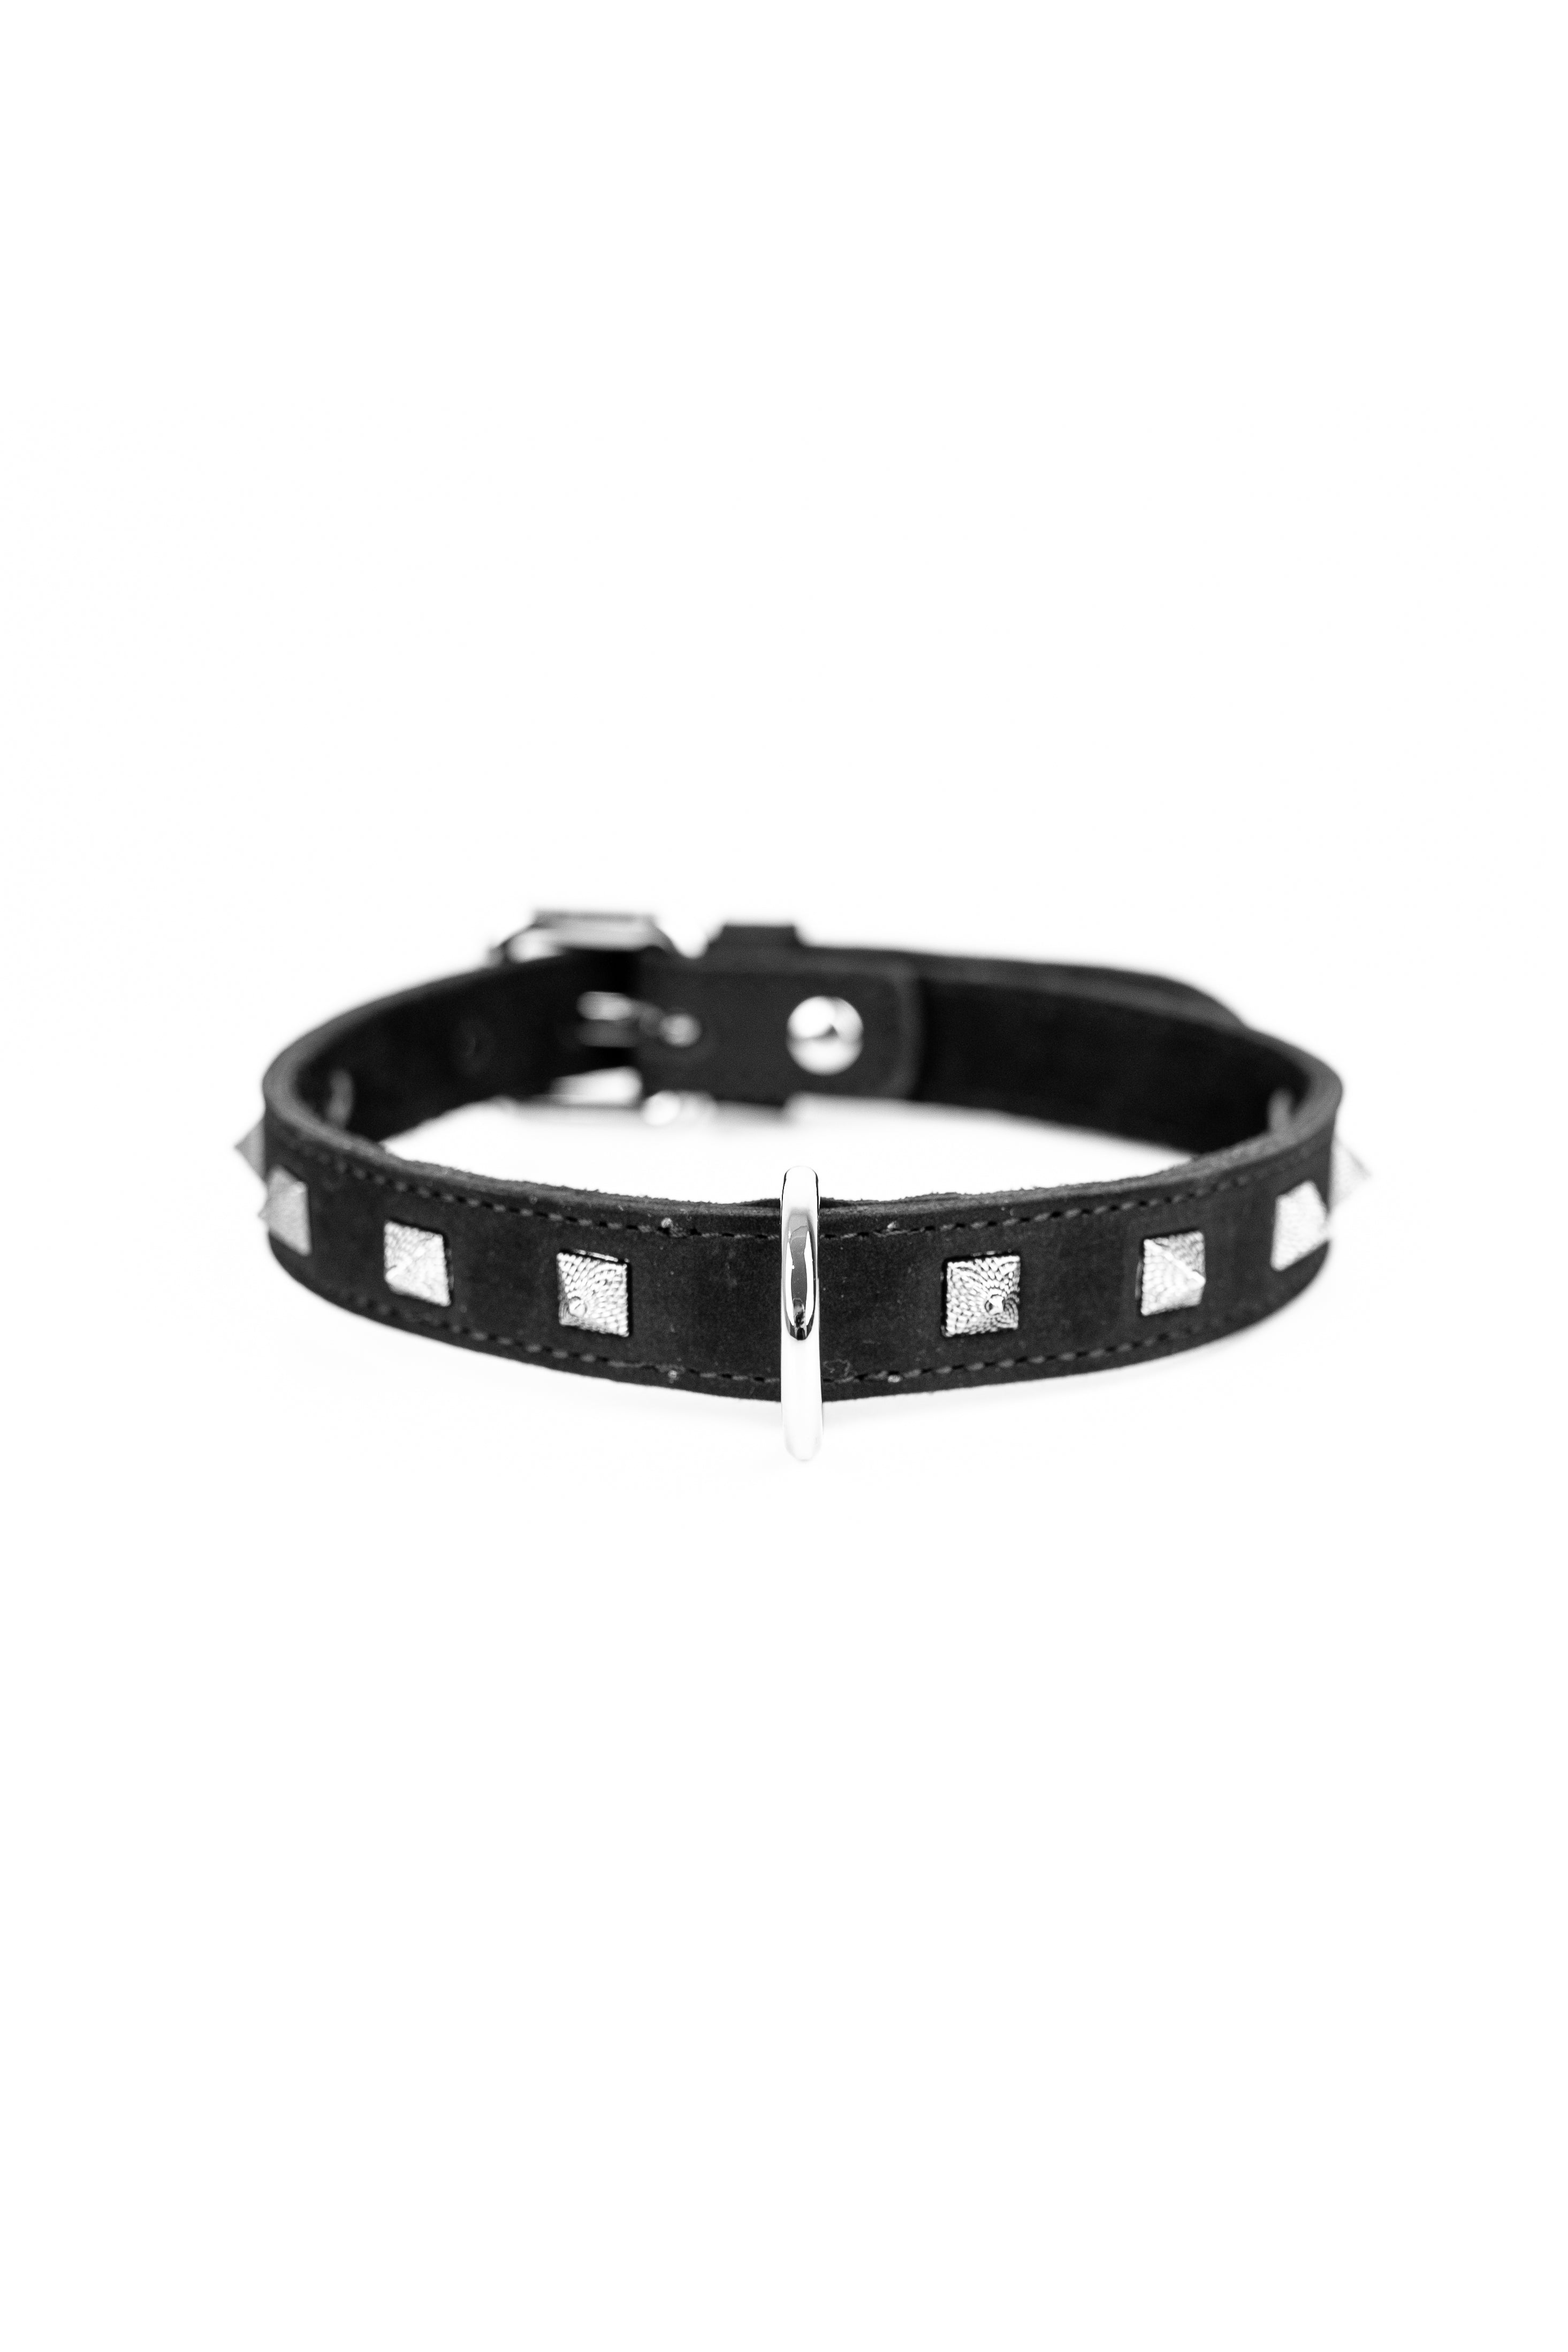 Faux Leather Spiked Choker